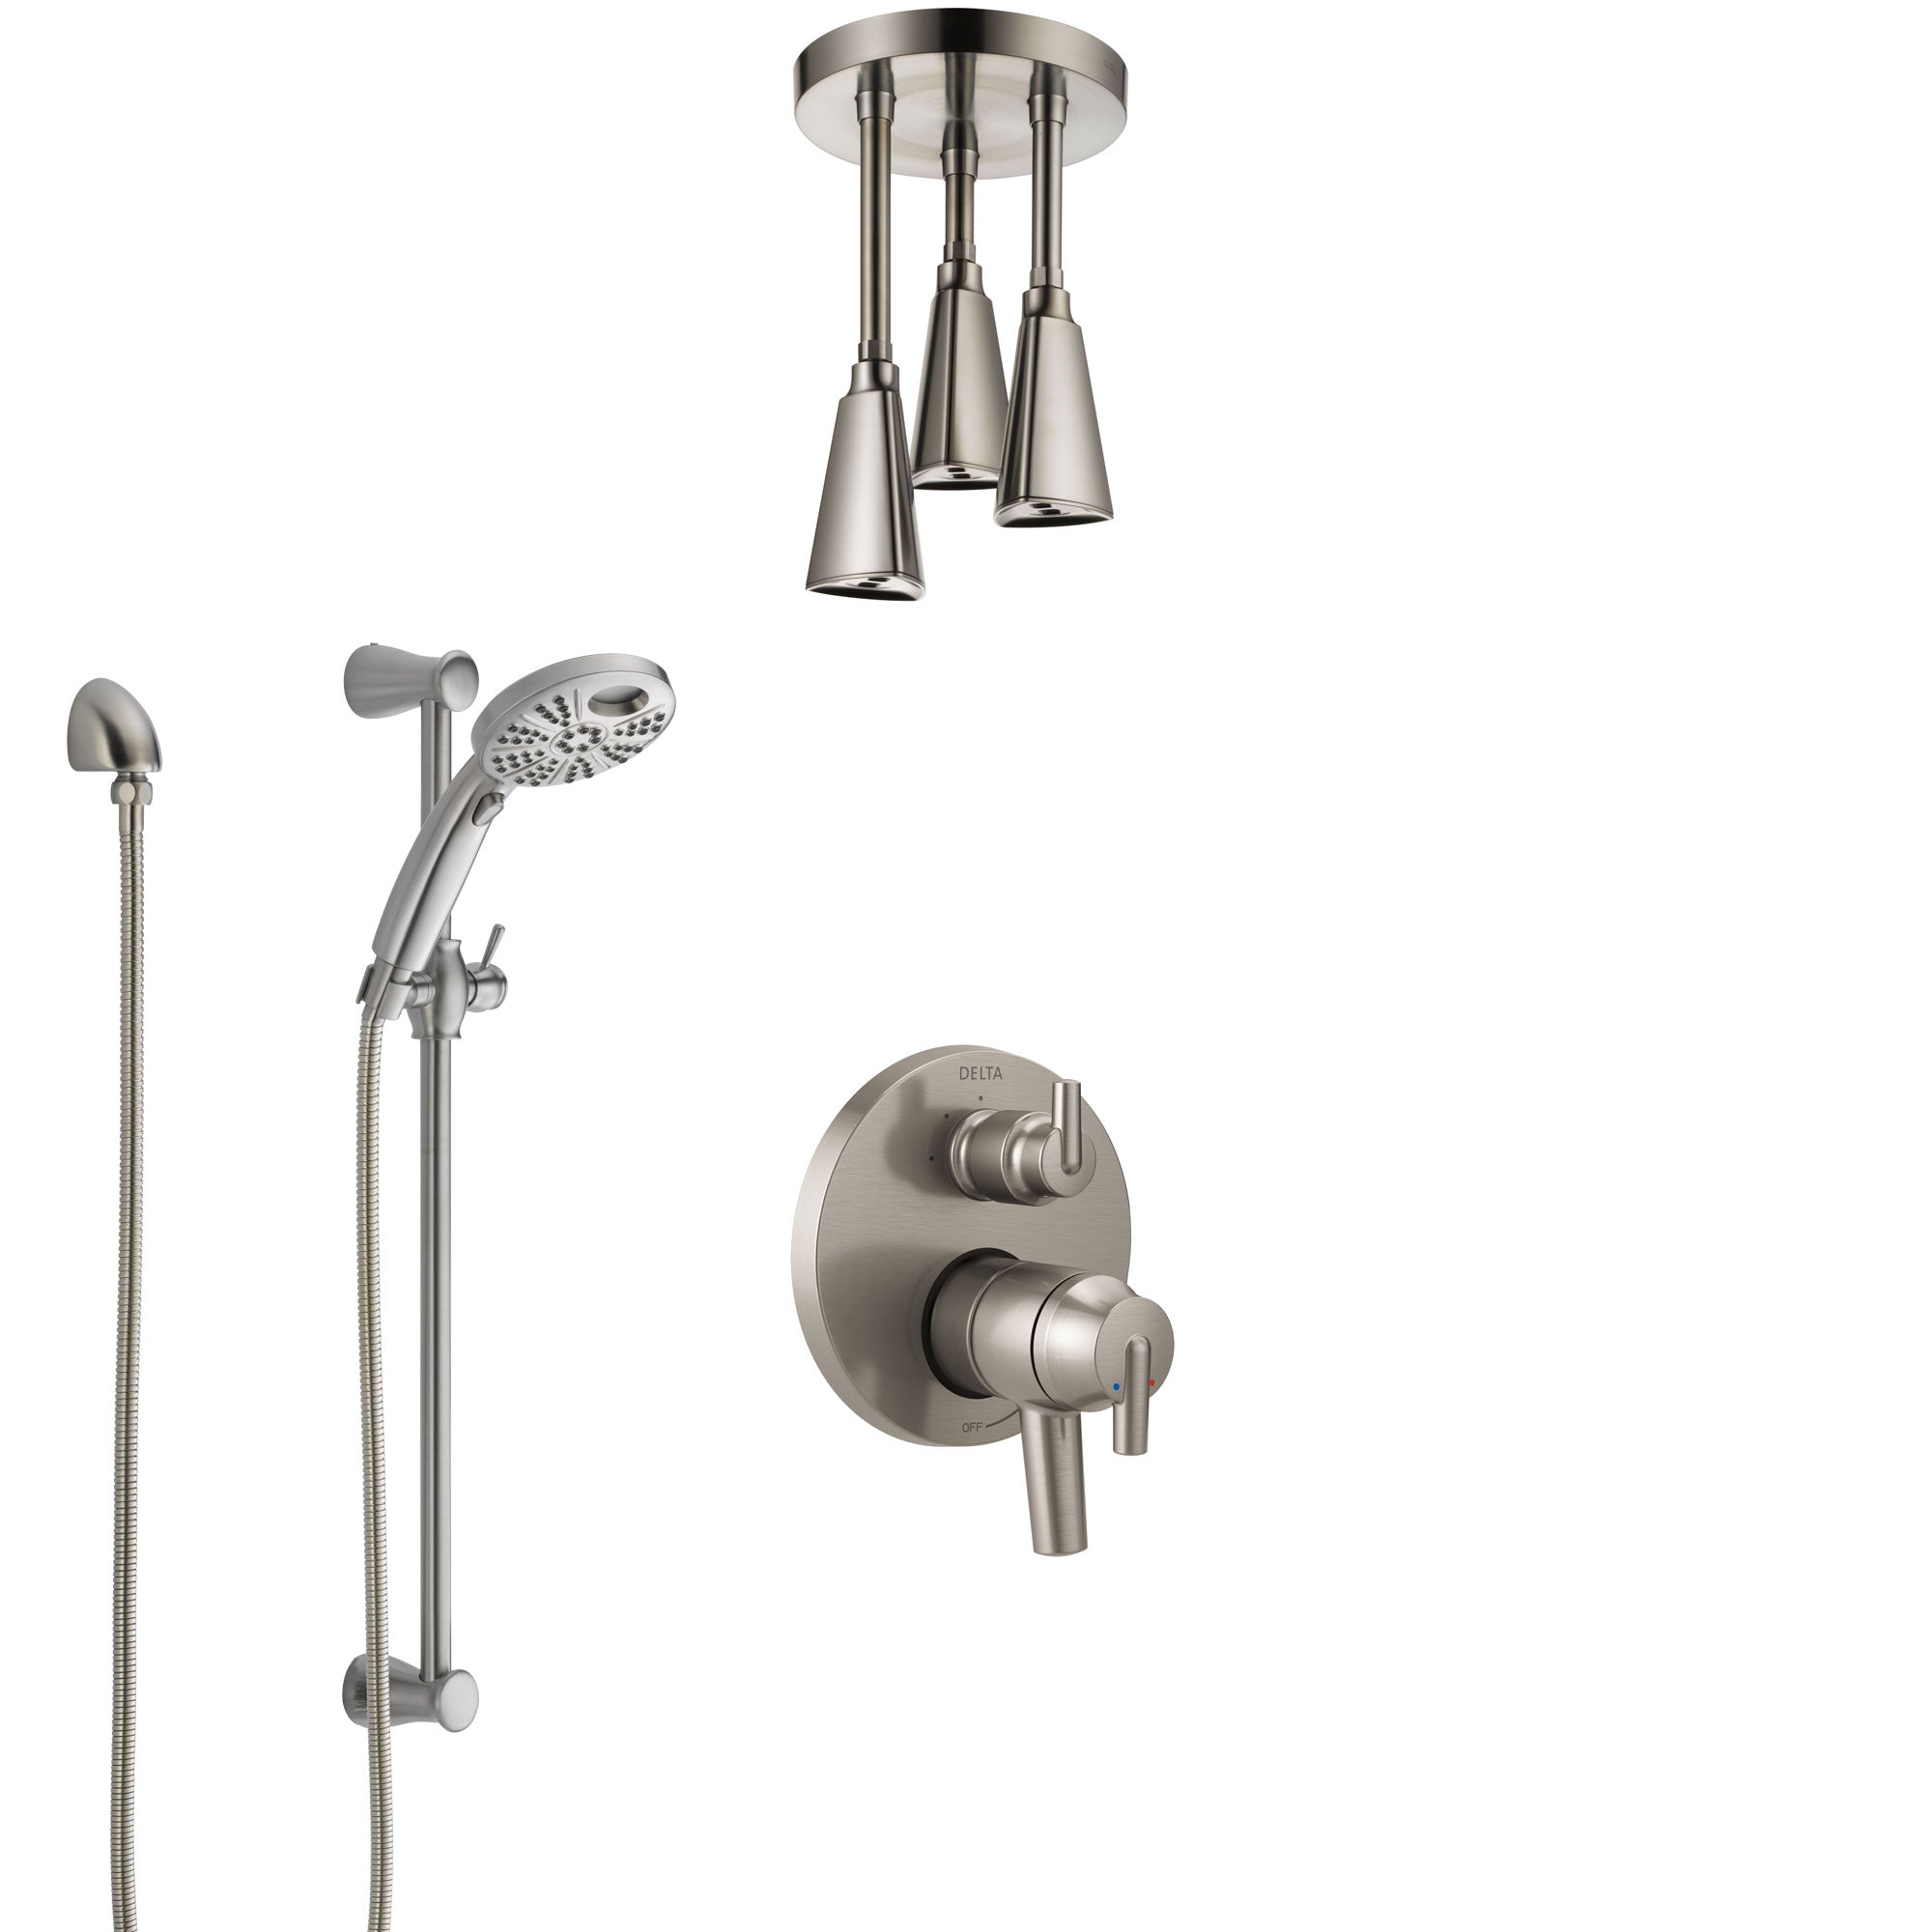 Delta Trinsic Dual Control Handle Stainless Steel Finish Shower System, Integrated Diverter, Ceiling Mount Showerhead, & Temp2O Hand Shower SS27859SS3